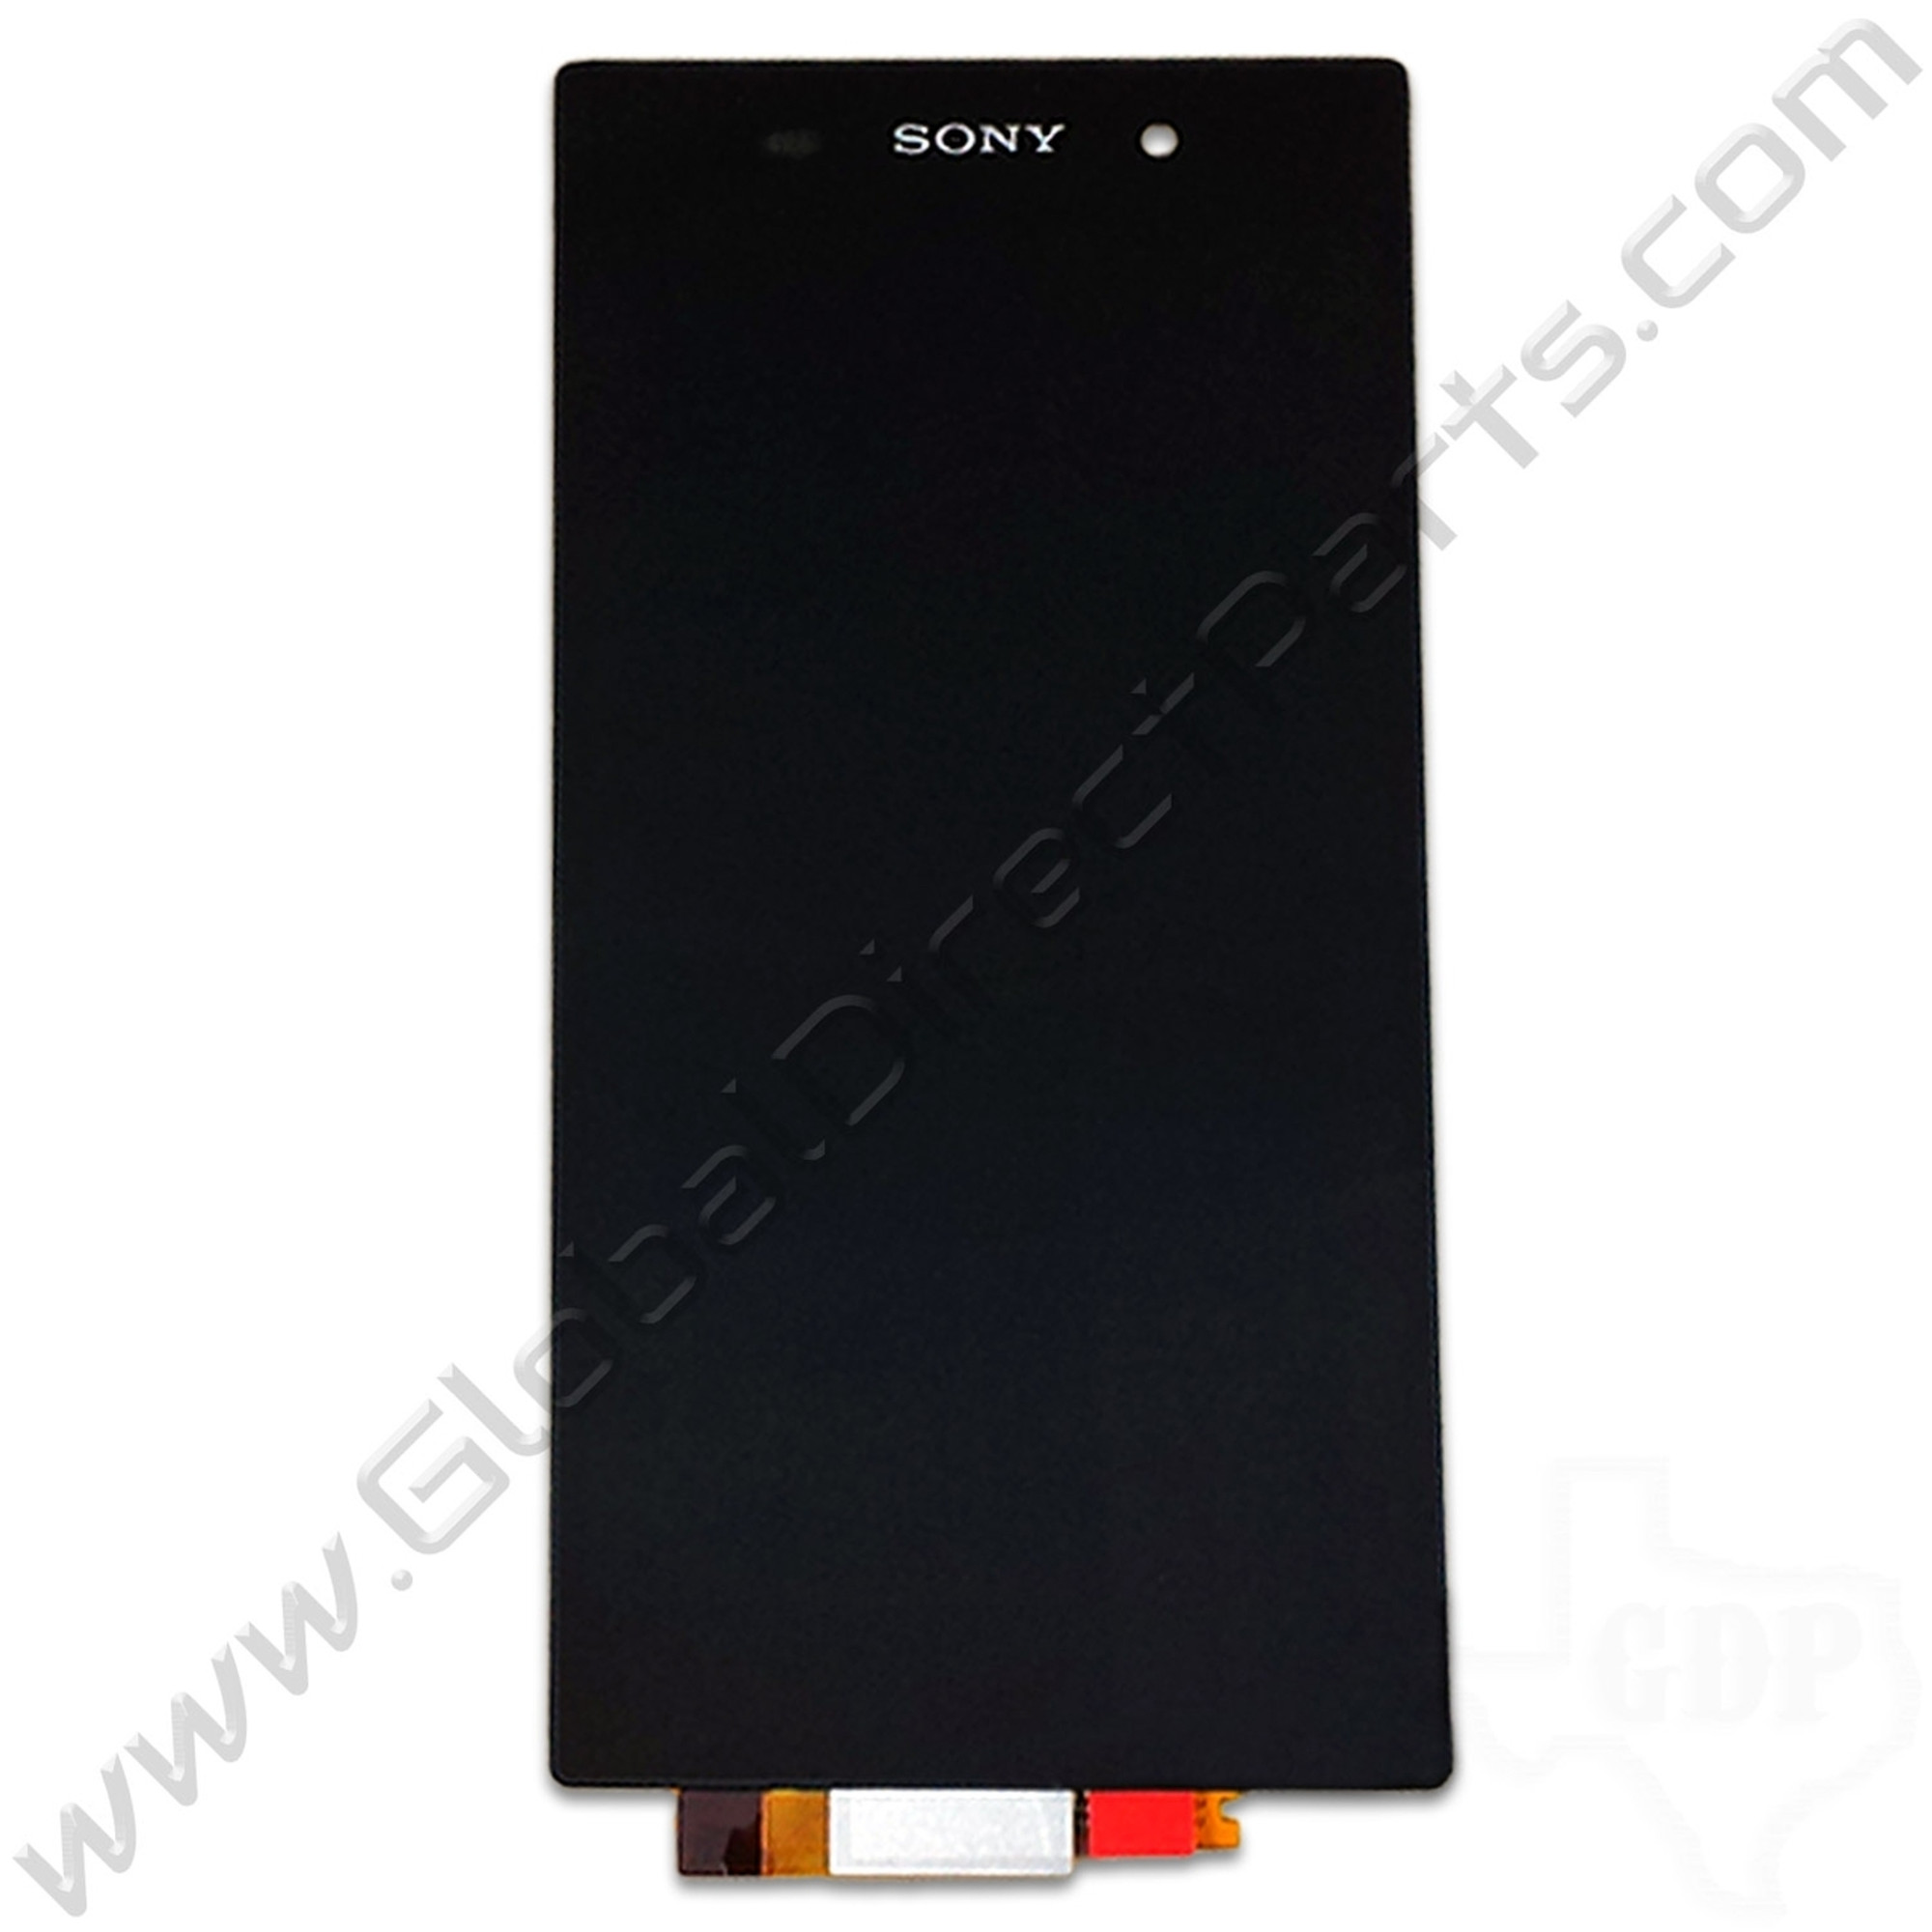 Adviseur Beschrijven voorzien OEM Sony Xperia Z1 C6902 LCD & Digitizer Assembly - Global Direct Parts